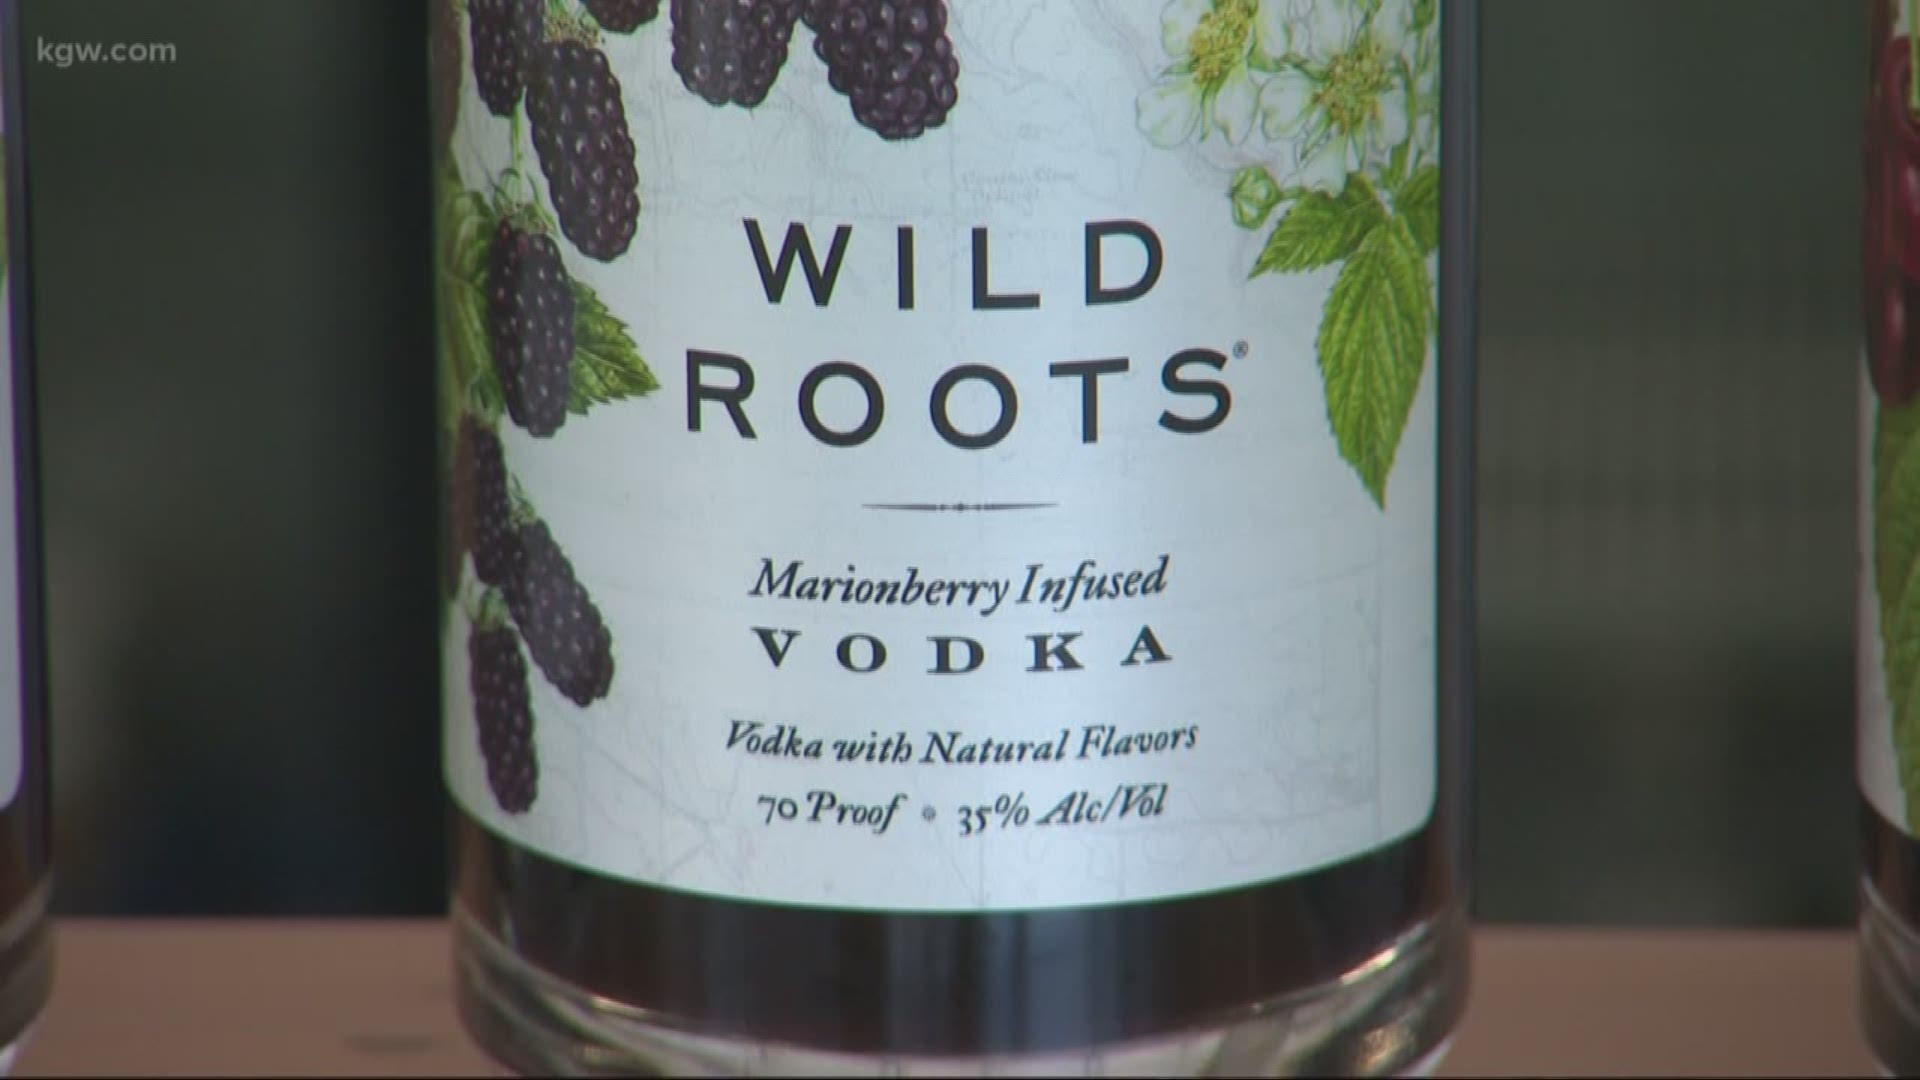 Wild Roots opens a new tasting room